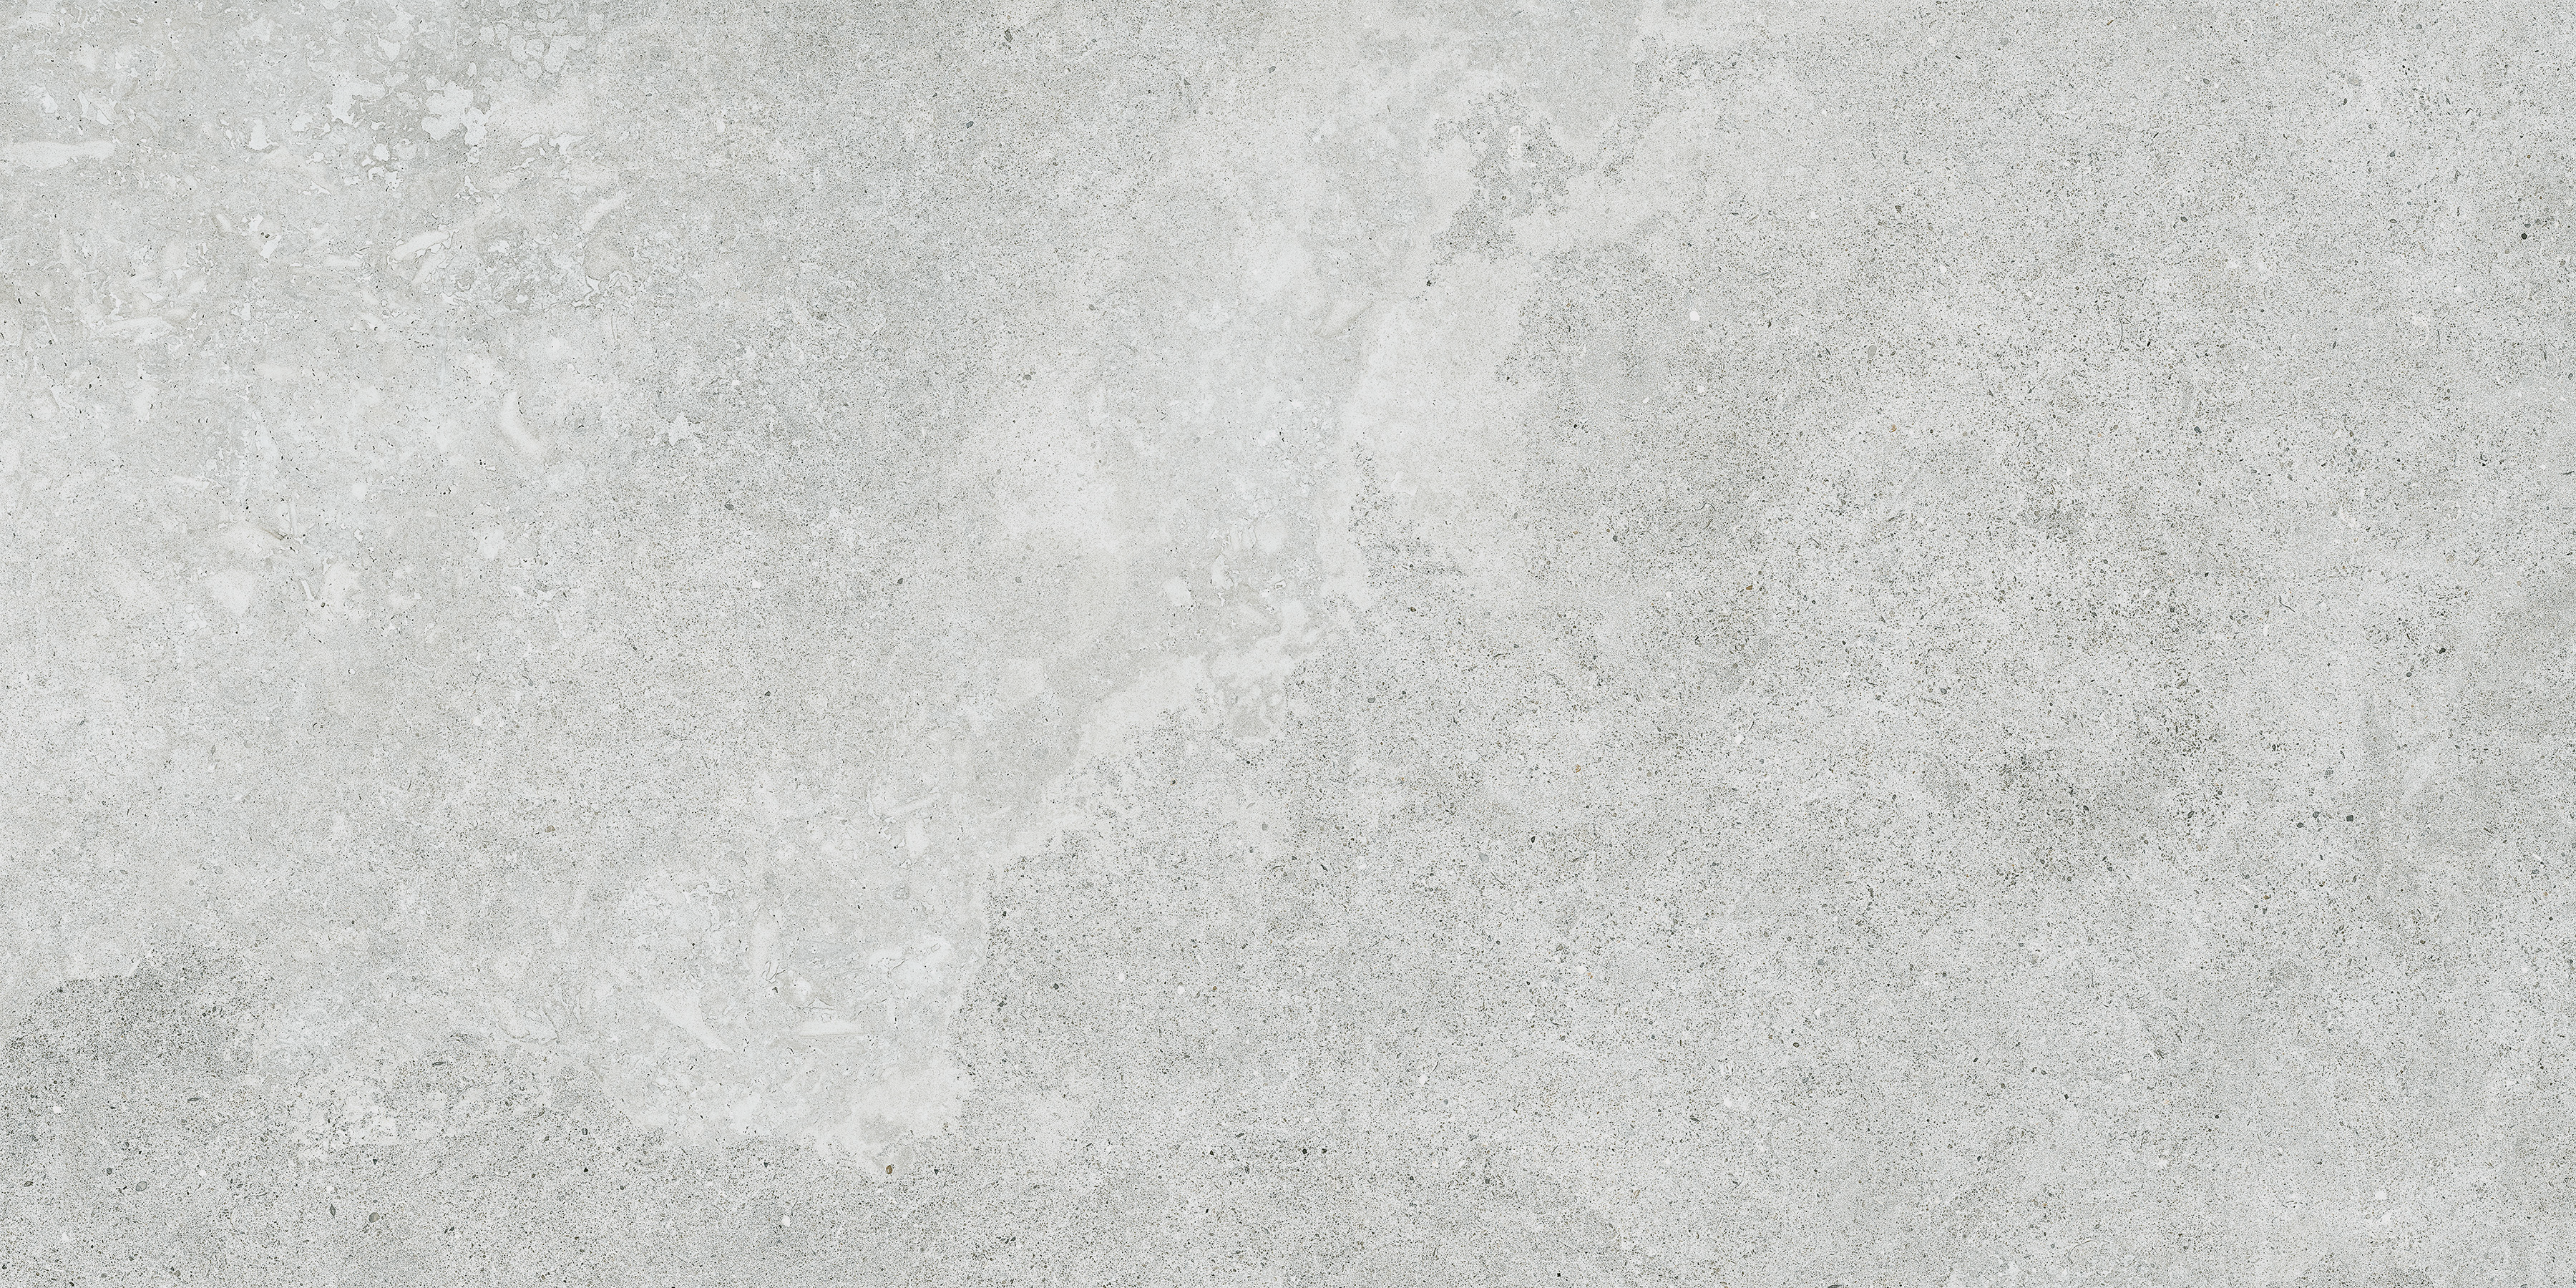 grigio pattern glazed porcelain field tile from veneta anatolia collection distributed by surface group international matte finish pressed edge 12x24 rectangle shape